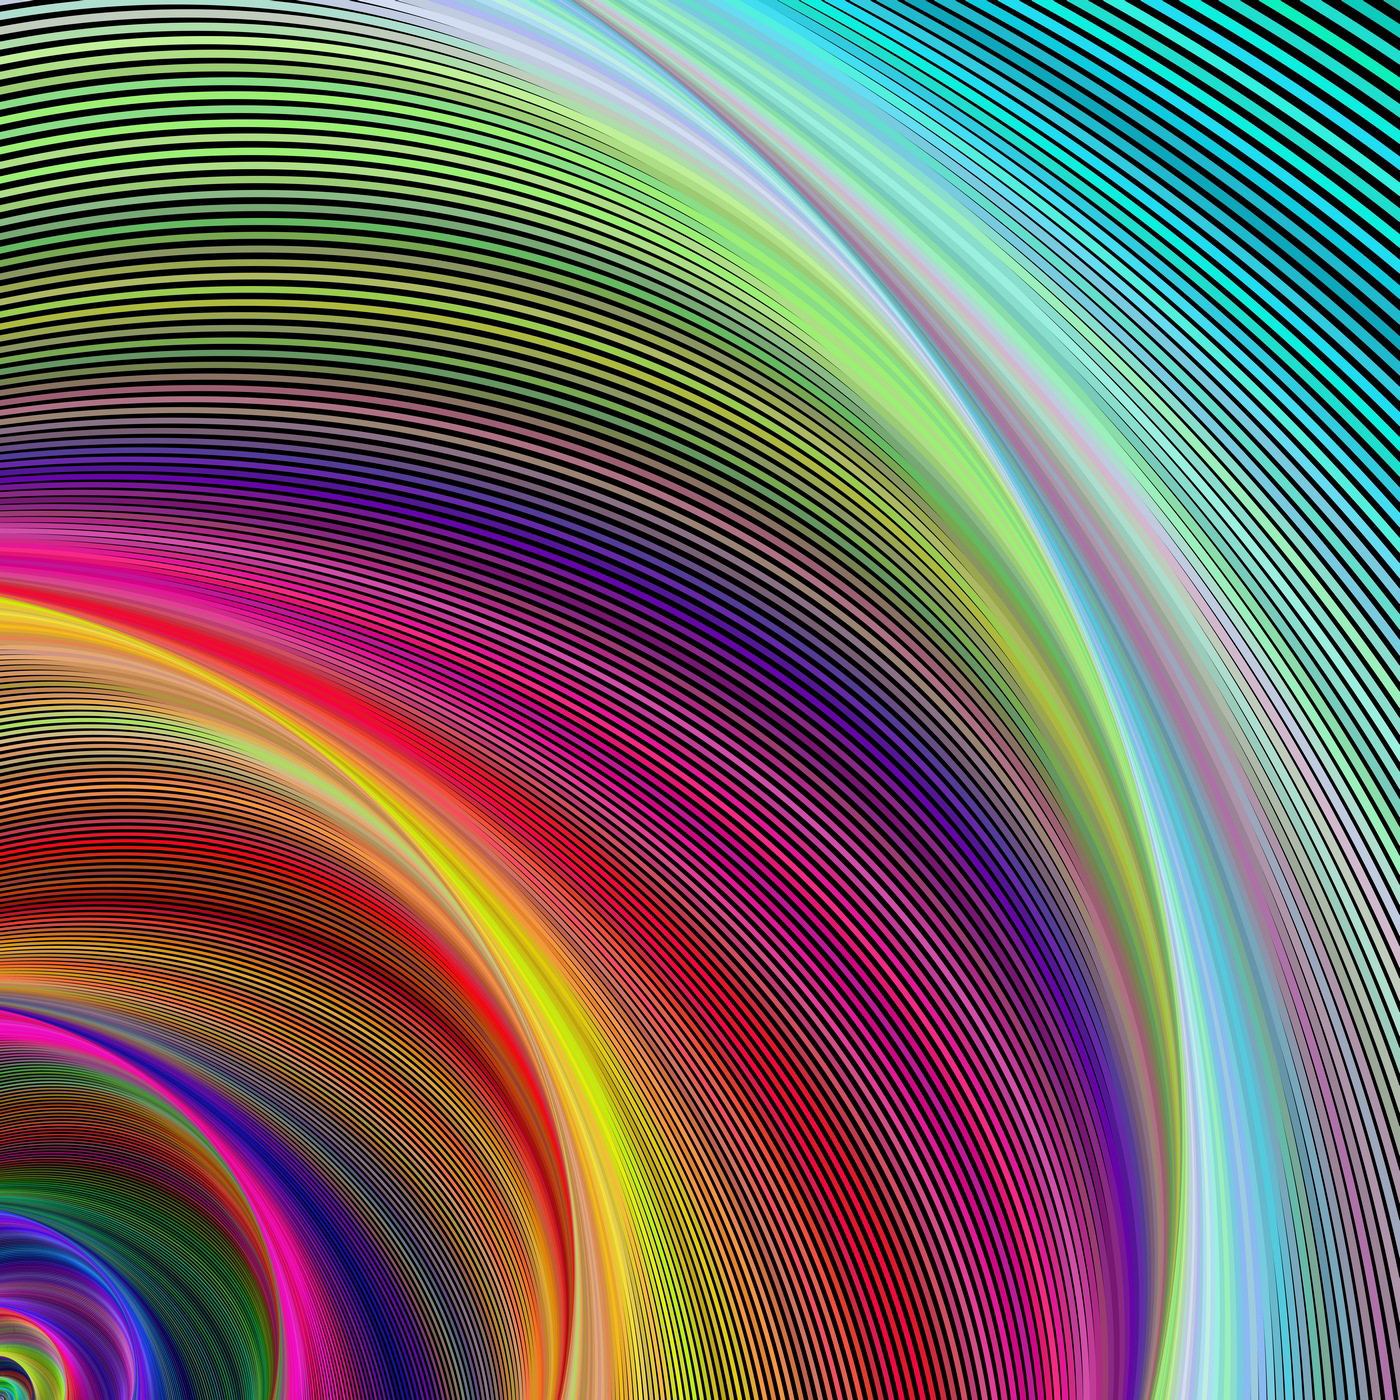 Colorful Curved Abstract Designs on Behance